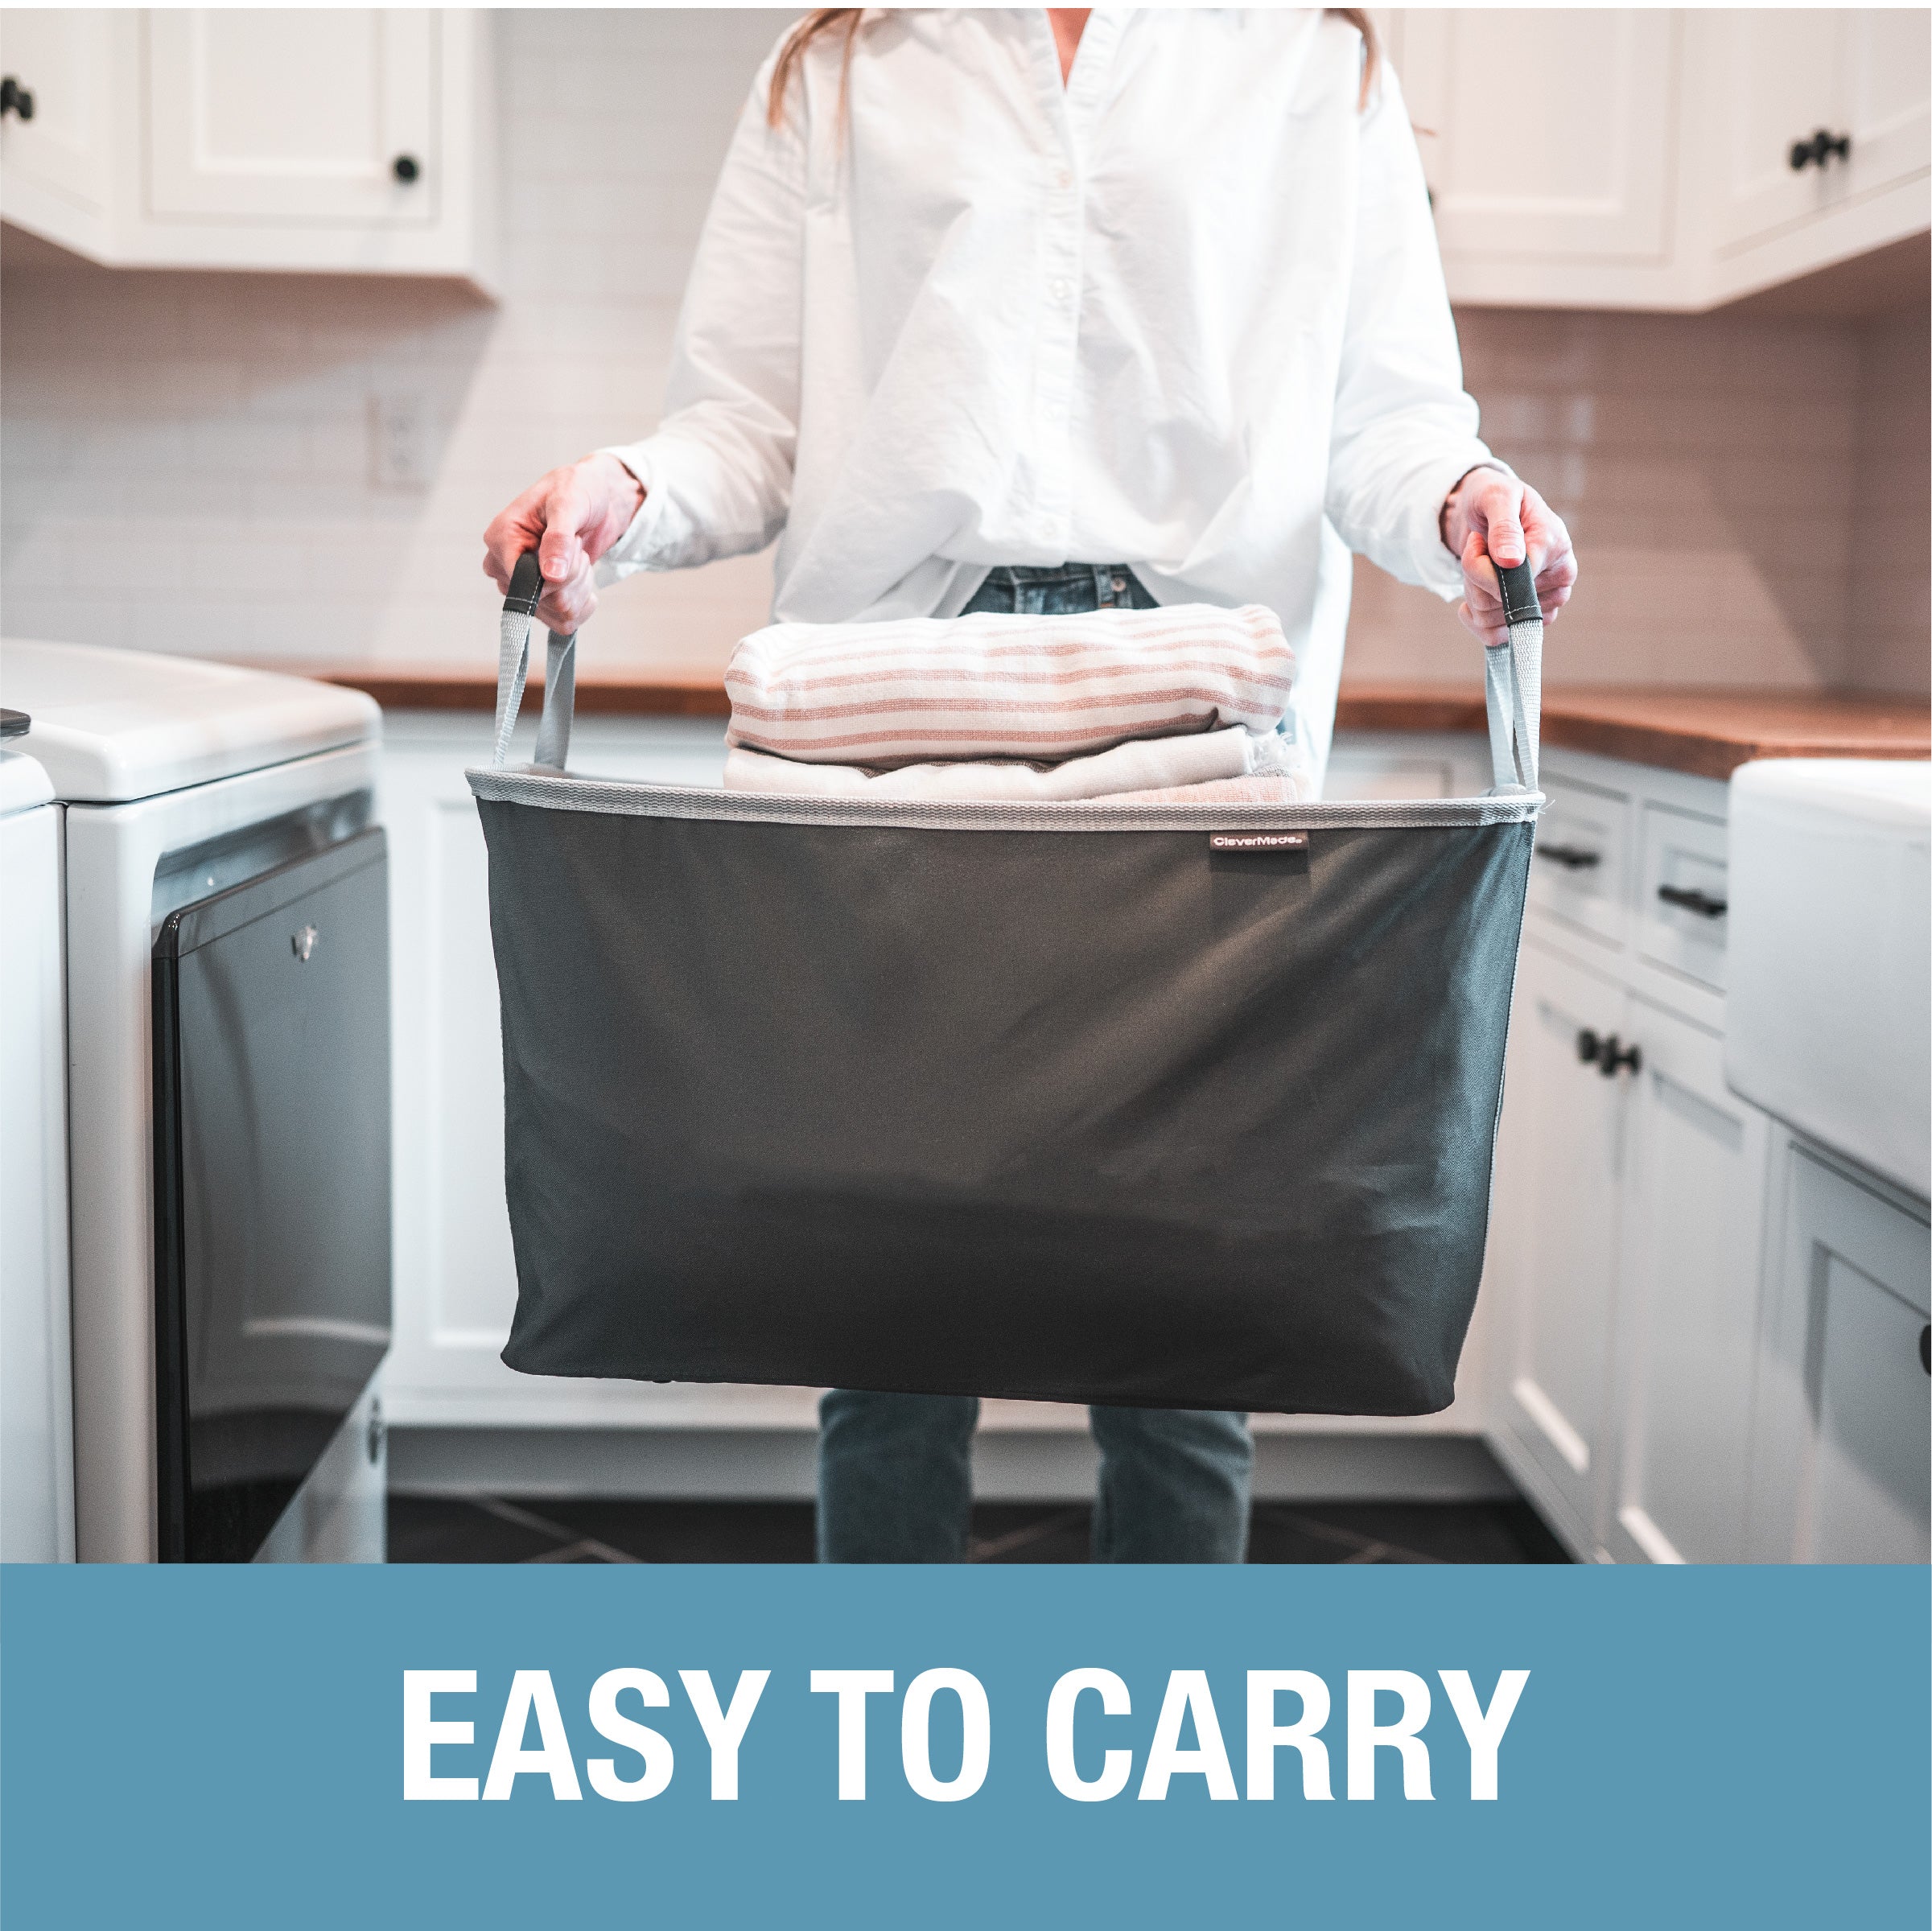 Clevermade Collapsible Laundry Caddy with Divider